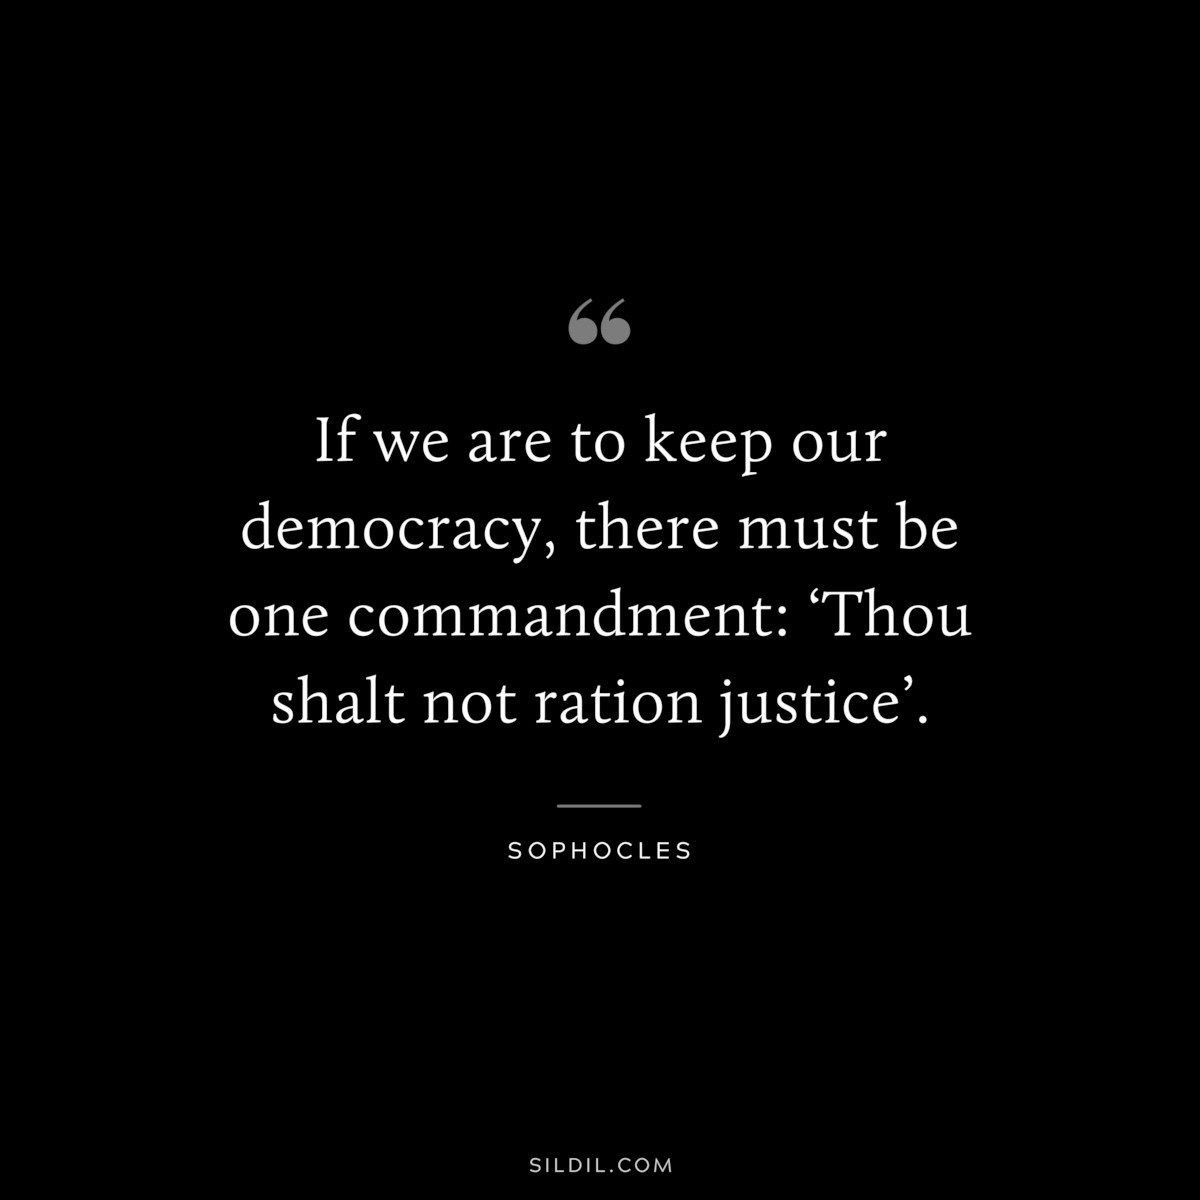 If we are to keep our democracy, there must be one commandment: ‘Thou shalt not ration justice’. ― Sophocles